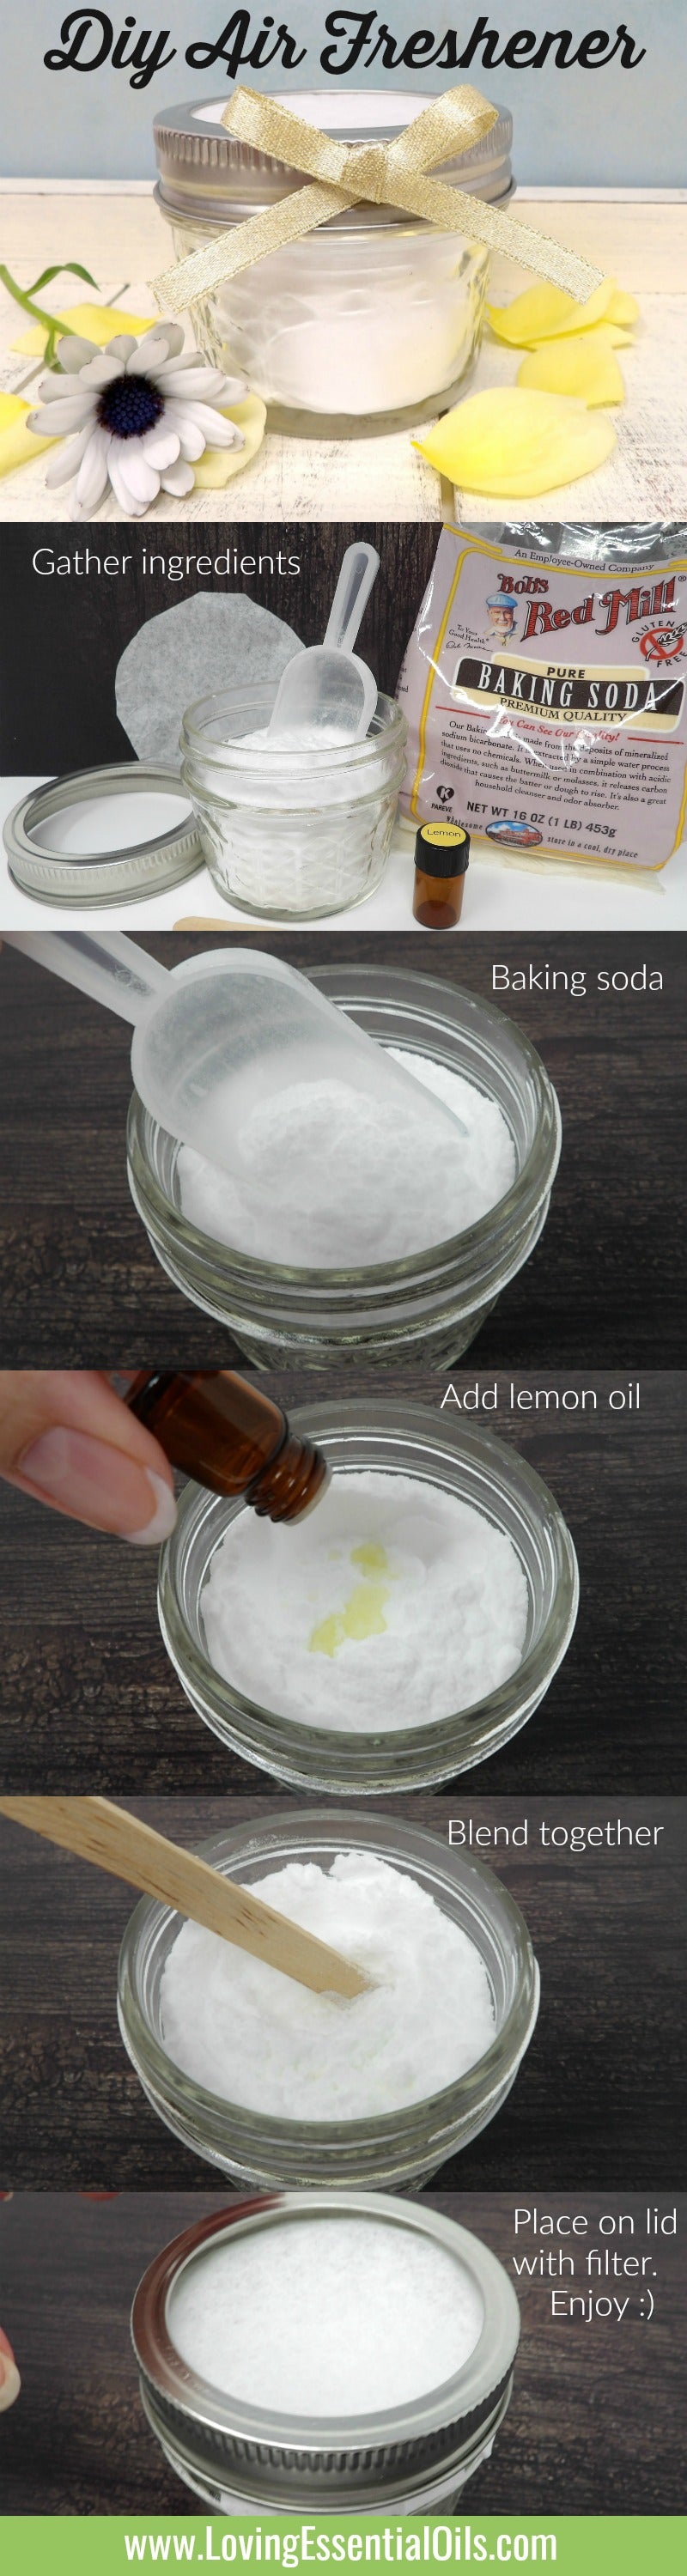 DIY Baking Soda Air Fresheners With Essential Oil Step by Step Tutorial by Loving Essential Oils